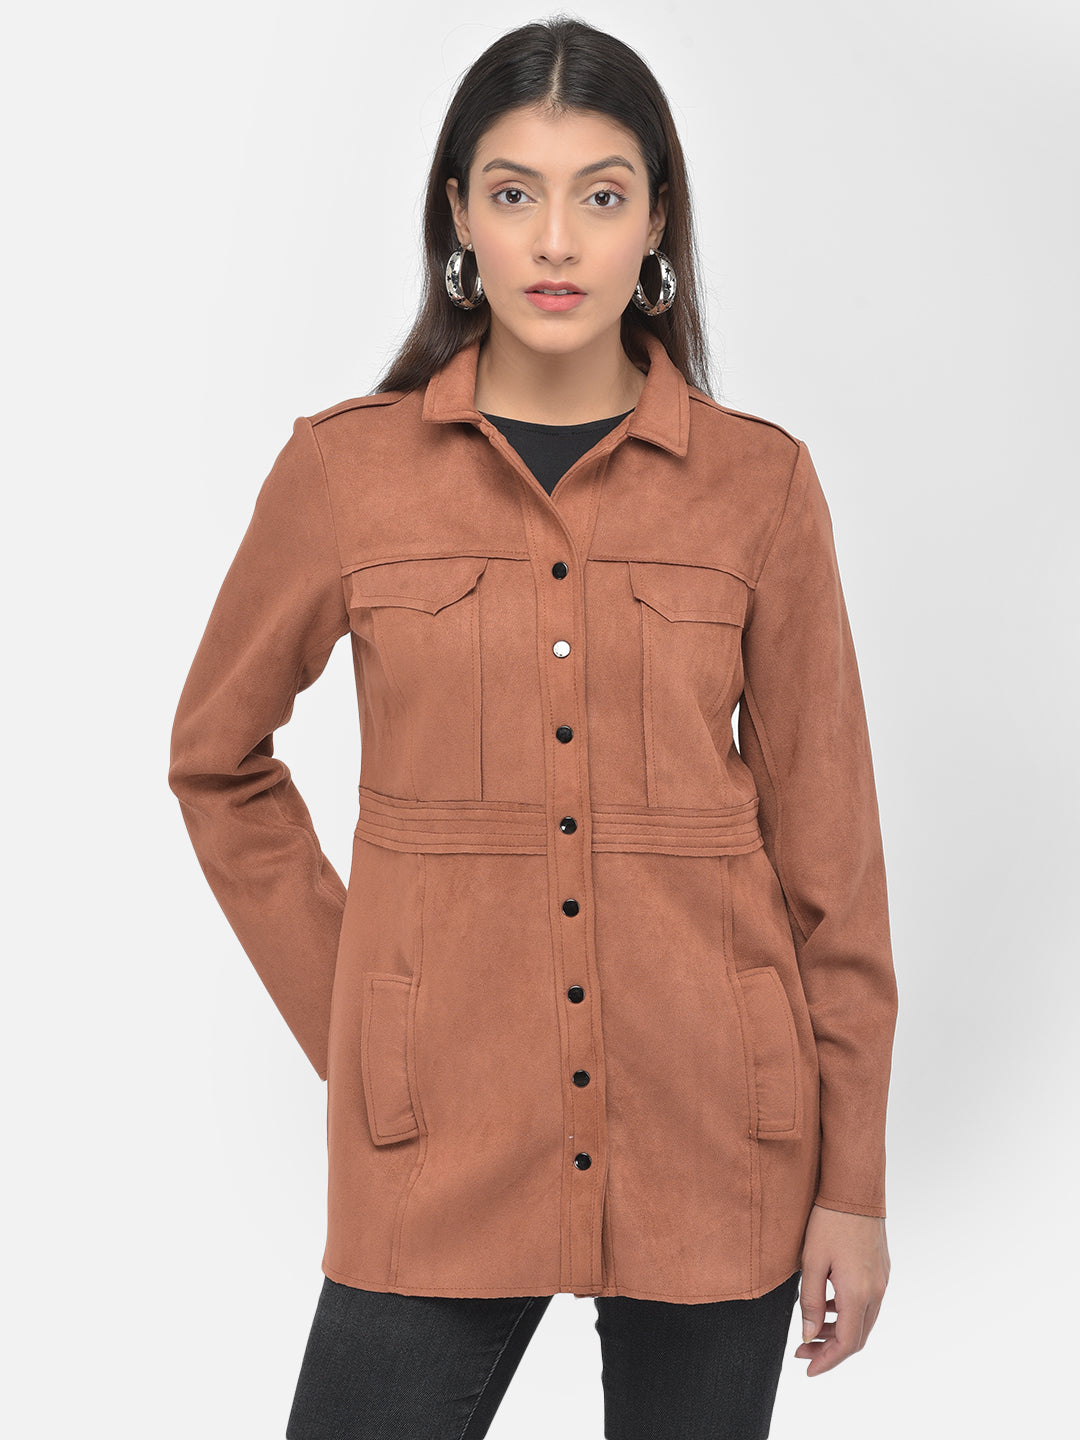 Full Sleeve Collar Neck Trench Overcoat Jacket With Pockets